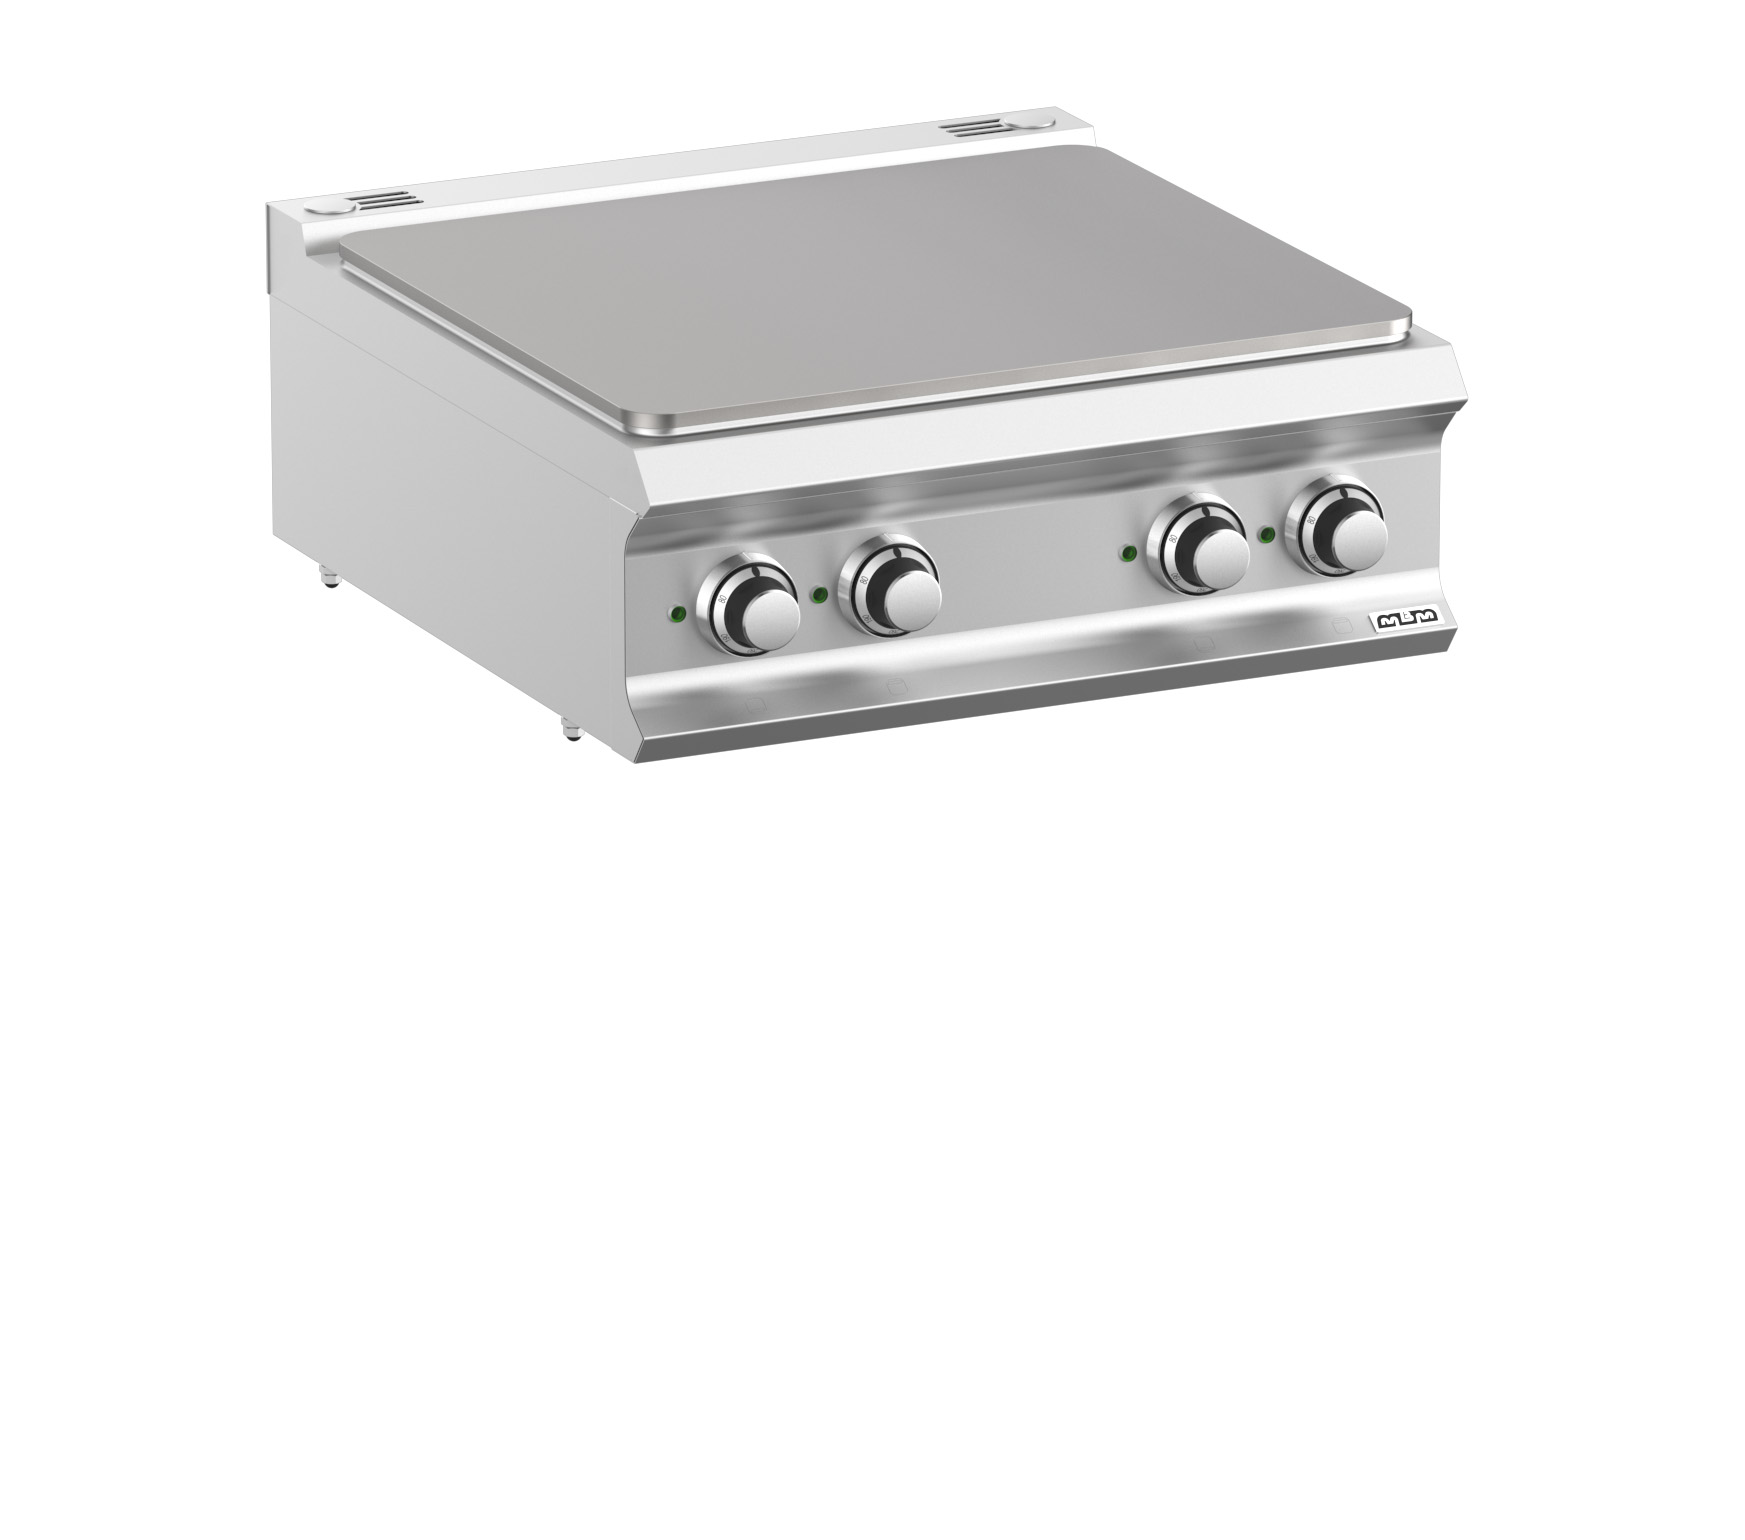 Domina Pro 700 TPE77T Electric Solid Cooker Countertop